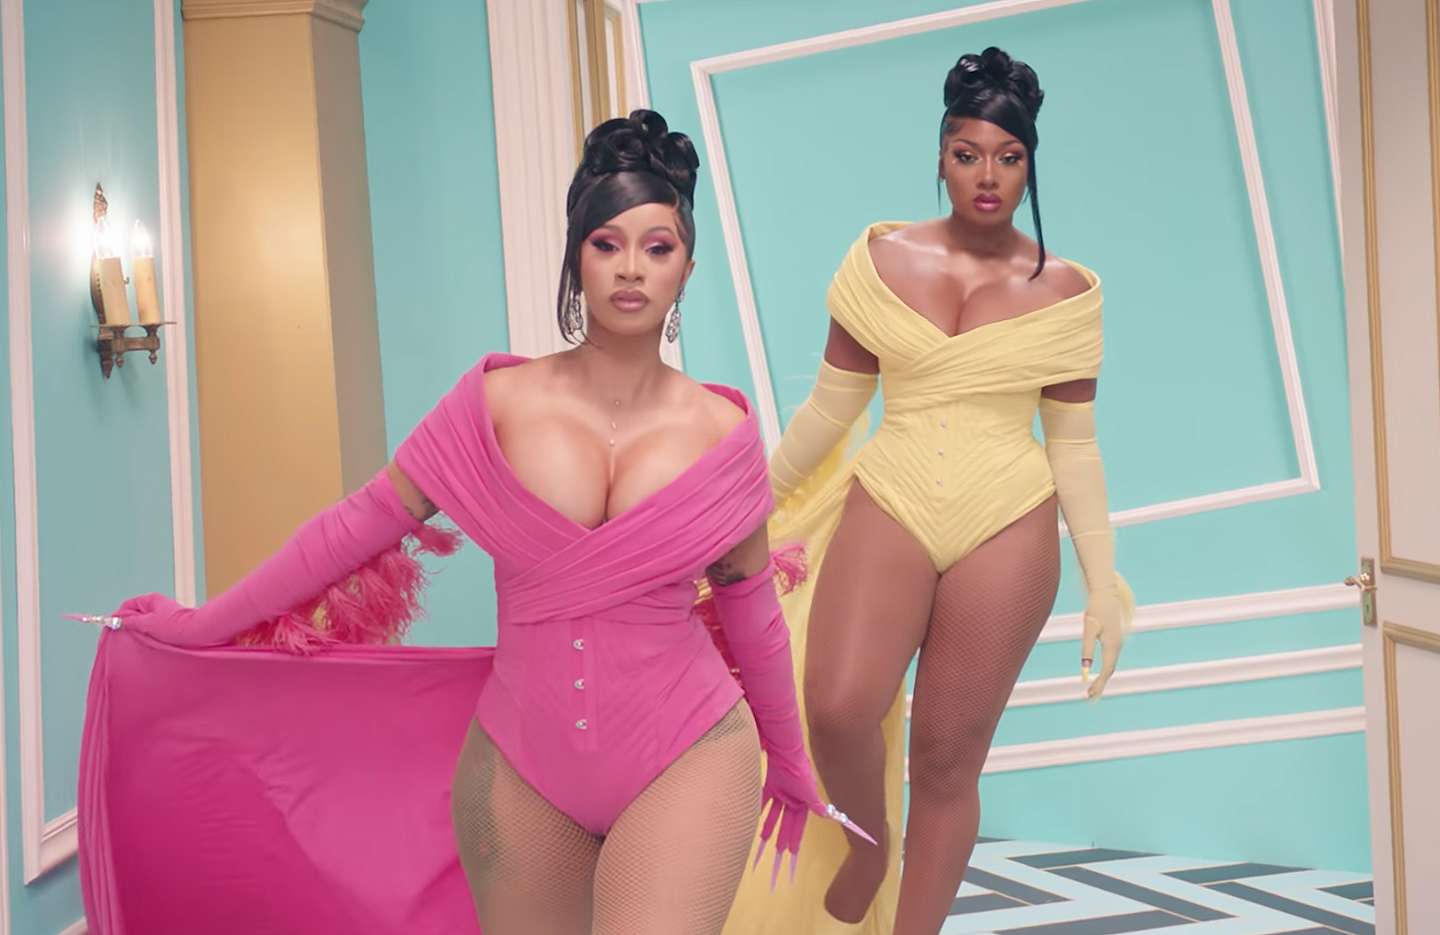 The 7 Hottest Fashion Moments From Cardi B WAP music video